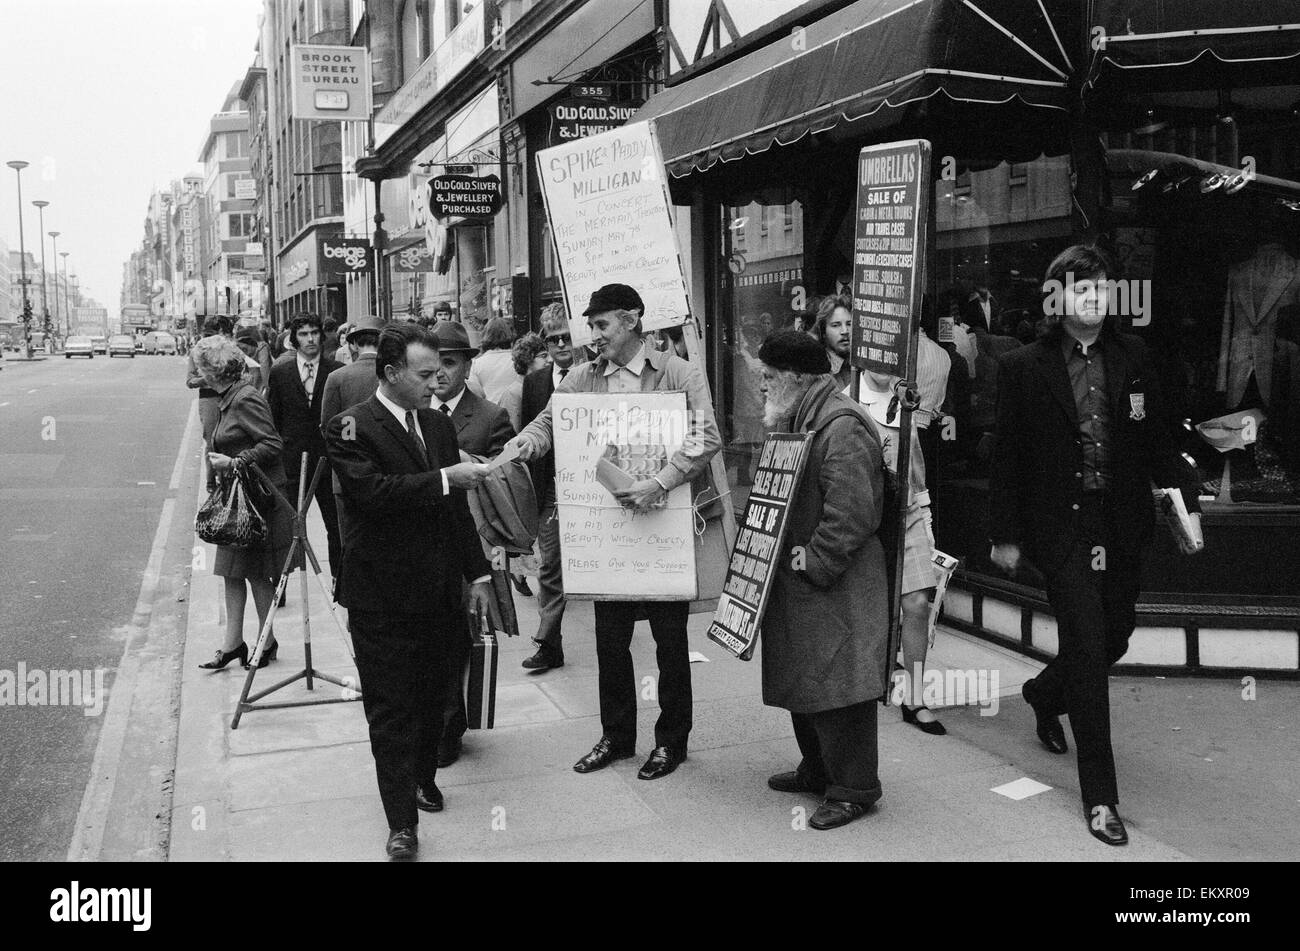 Spike Milligan & wife Paddy use a Sandwich board - borrowed from British Rail Lost Property - to advertise their upcoming charity performance in aid of 'Beauty Without Cruelty' at the Mermaid Theatre London, 4th May 1972. *** Local Caption *** Paddy McMil Stock Photo